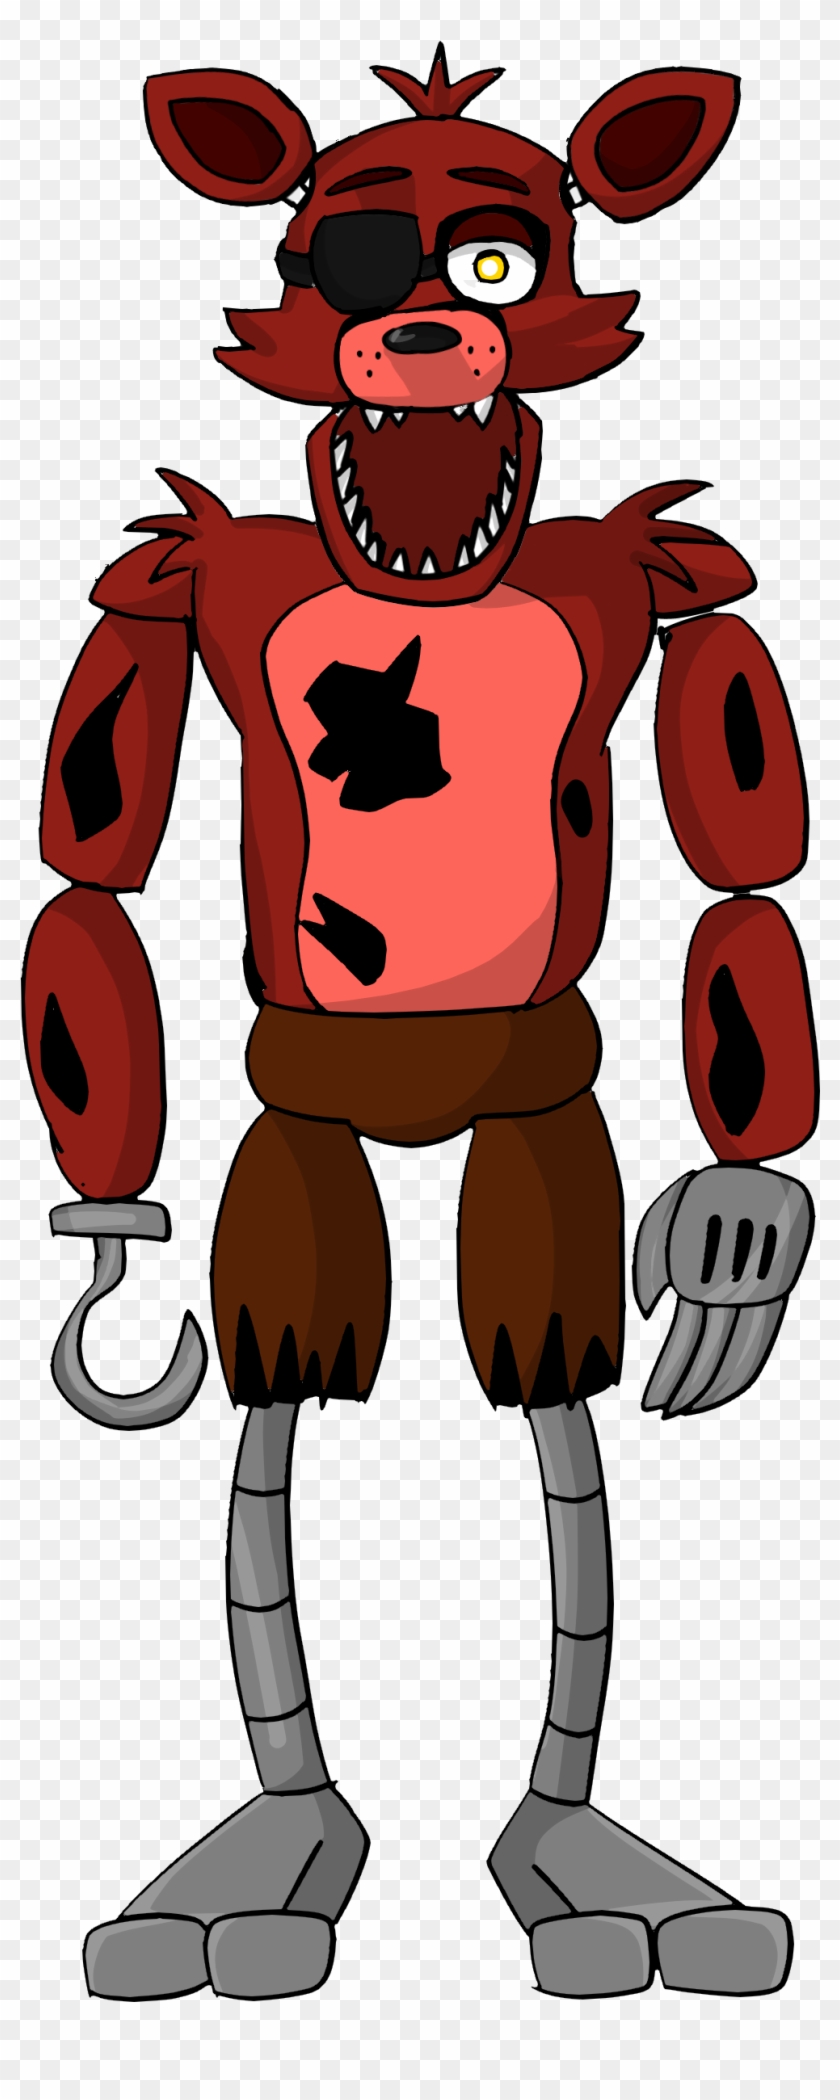 Foxy Full Body By Thatfnafgamer On Deviantart  Five Nights At Freddys  Drawings  Free Transparent PNG Clipart Images Download